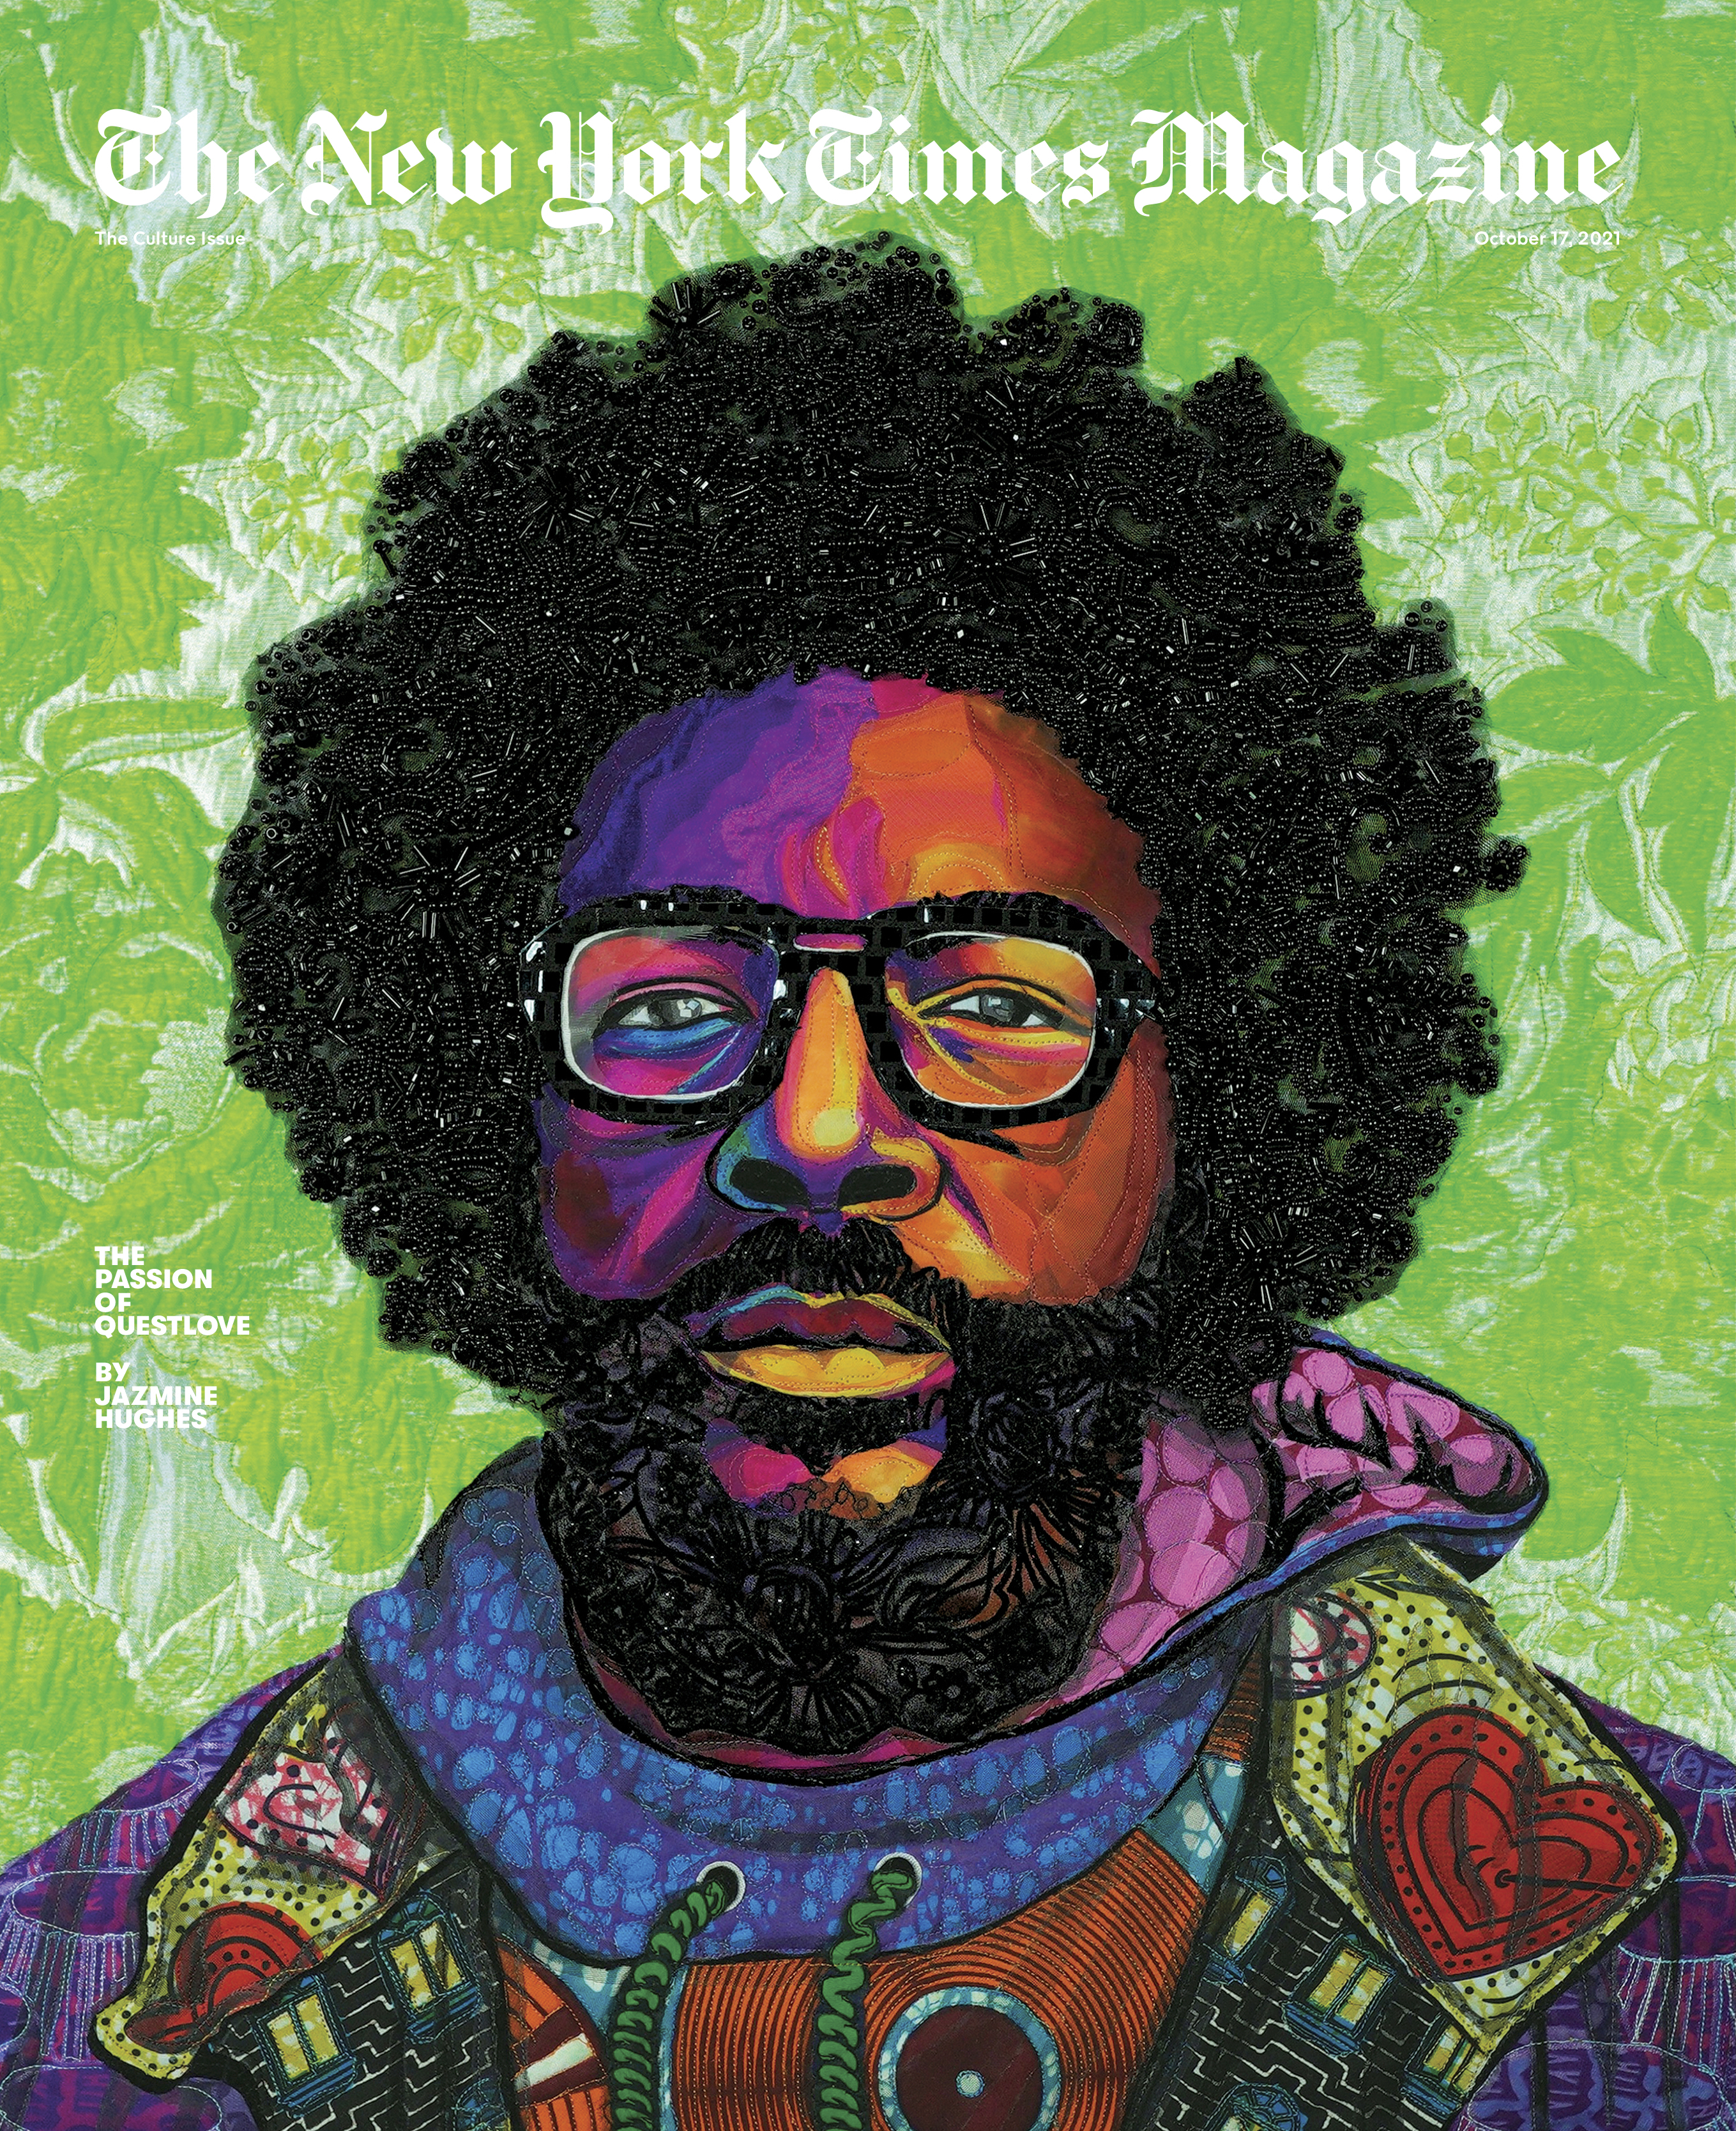 The New York Times Magazine - "The Passion of Questlove," October 17, 2021